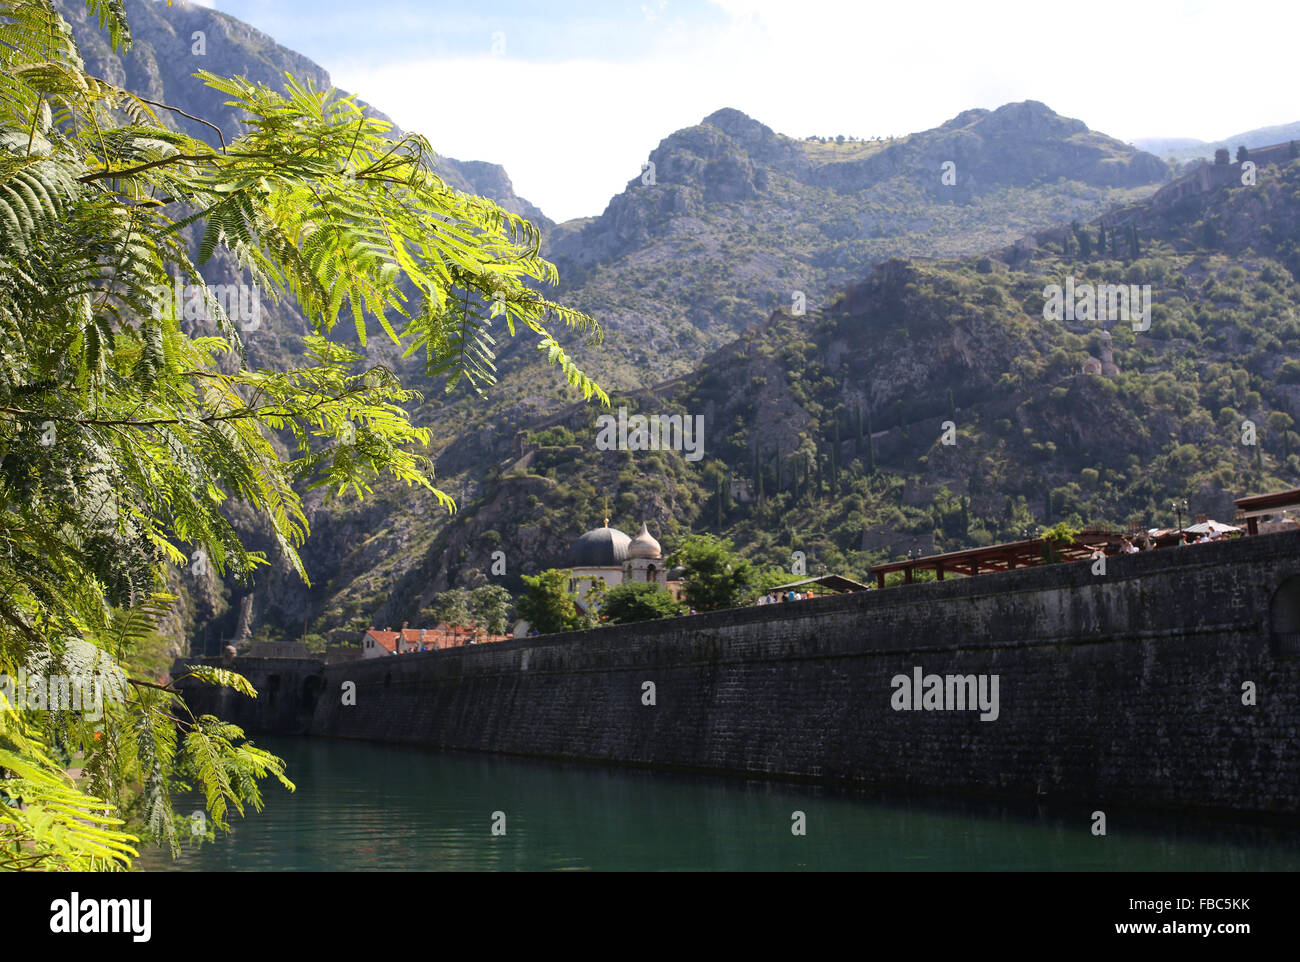 Mountains pictured looming over the city walls of the medieval port town of Kotor Montenegró Stock Photo